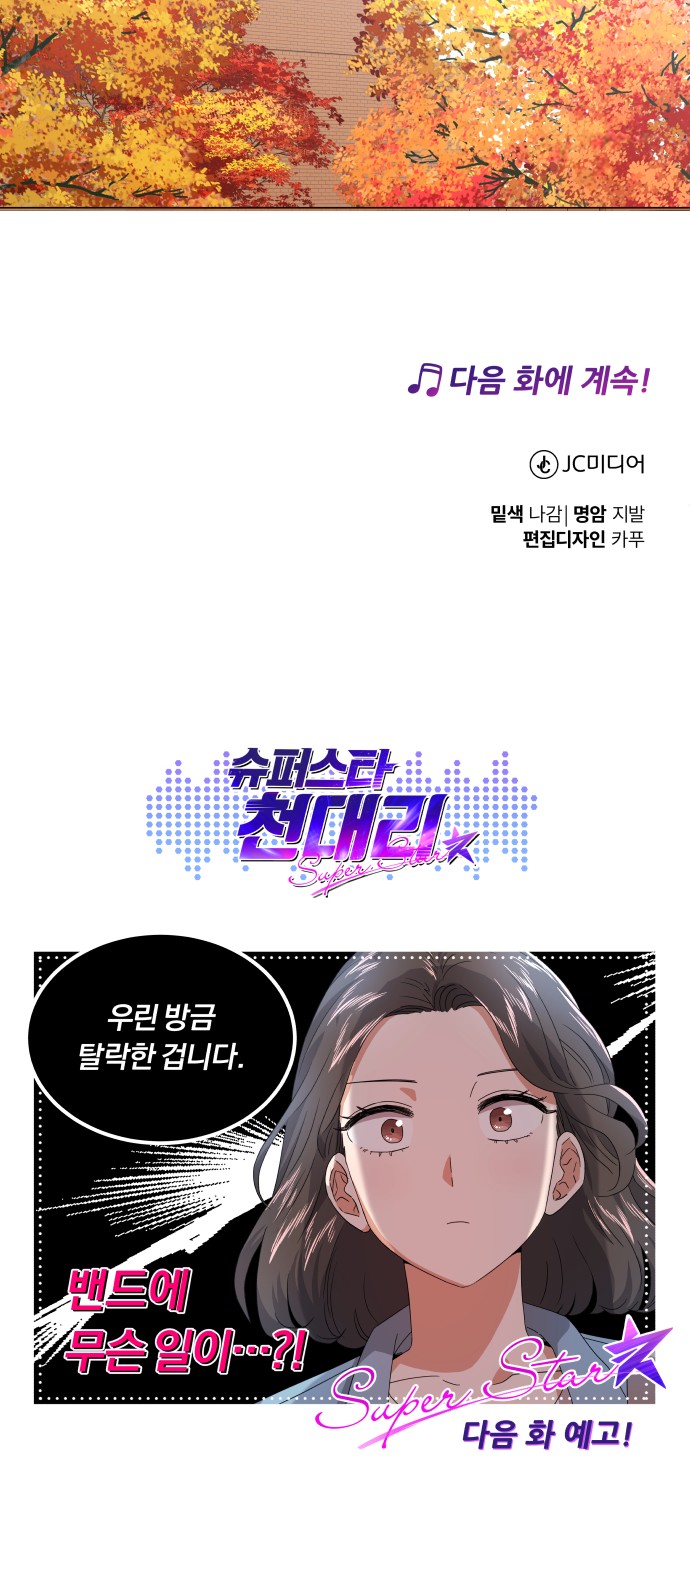 Superstar Cheon Dae-ri - Chapter 18 - Page 67